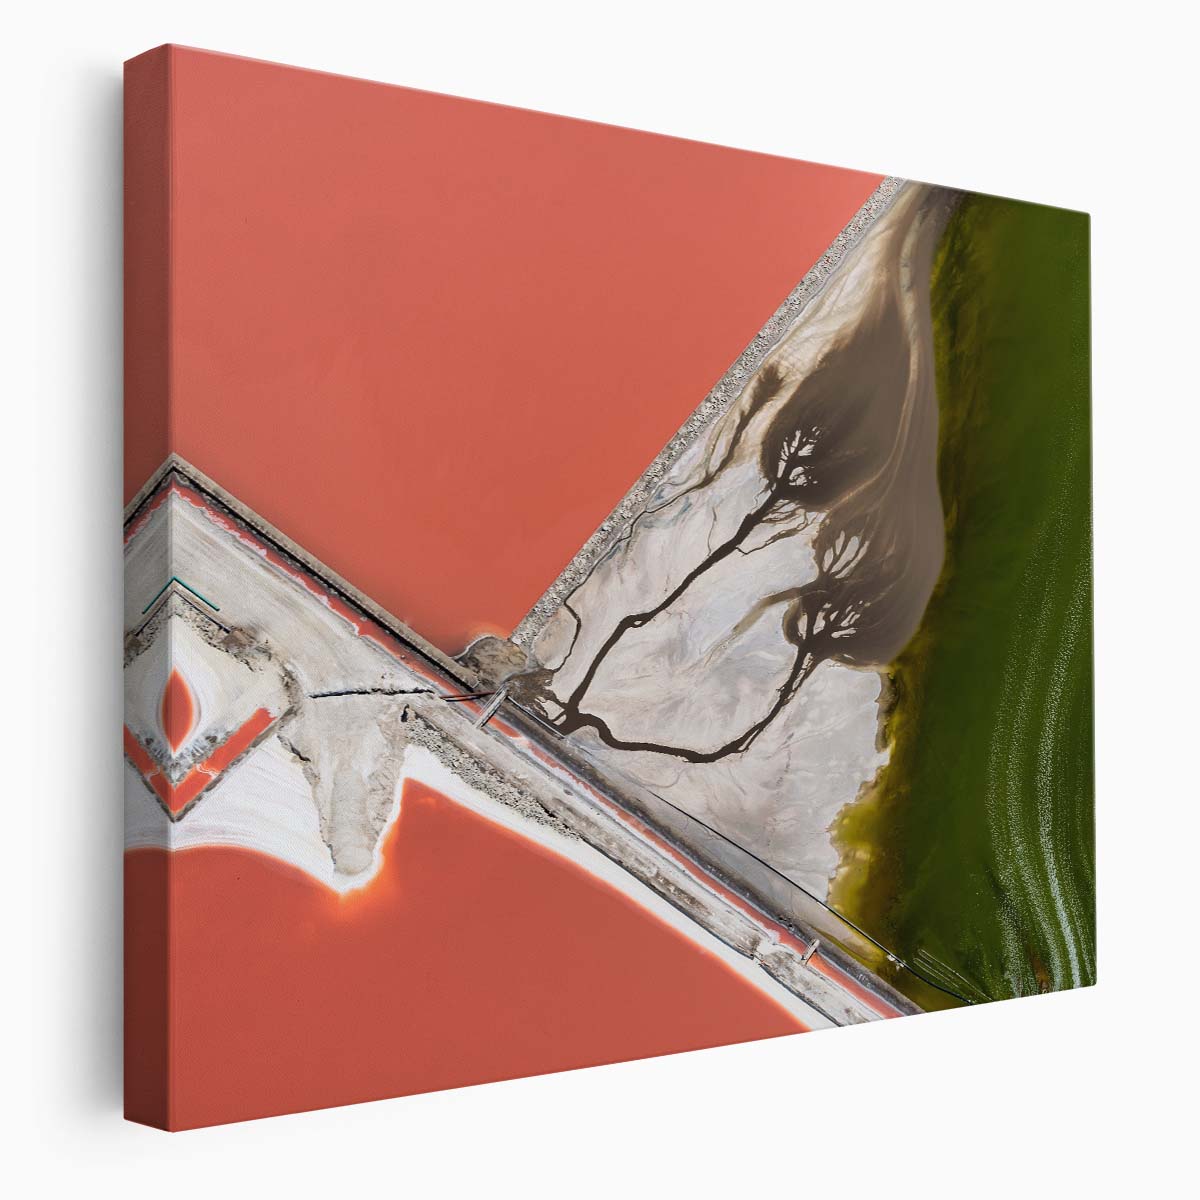 California Salt Pond Aerial Abstract Wall Art by Luxuriance Designs. Made in USA.